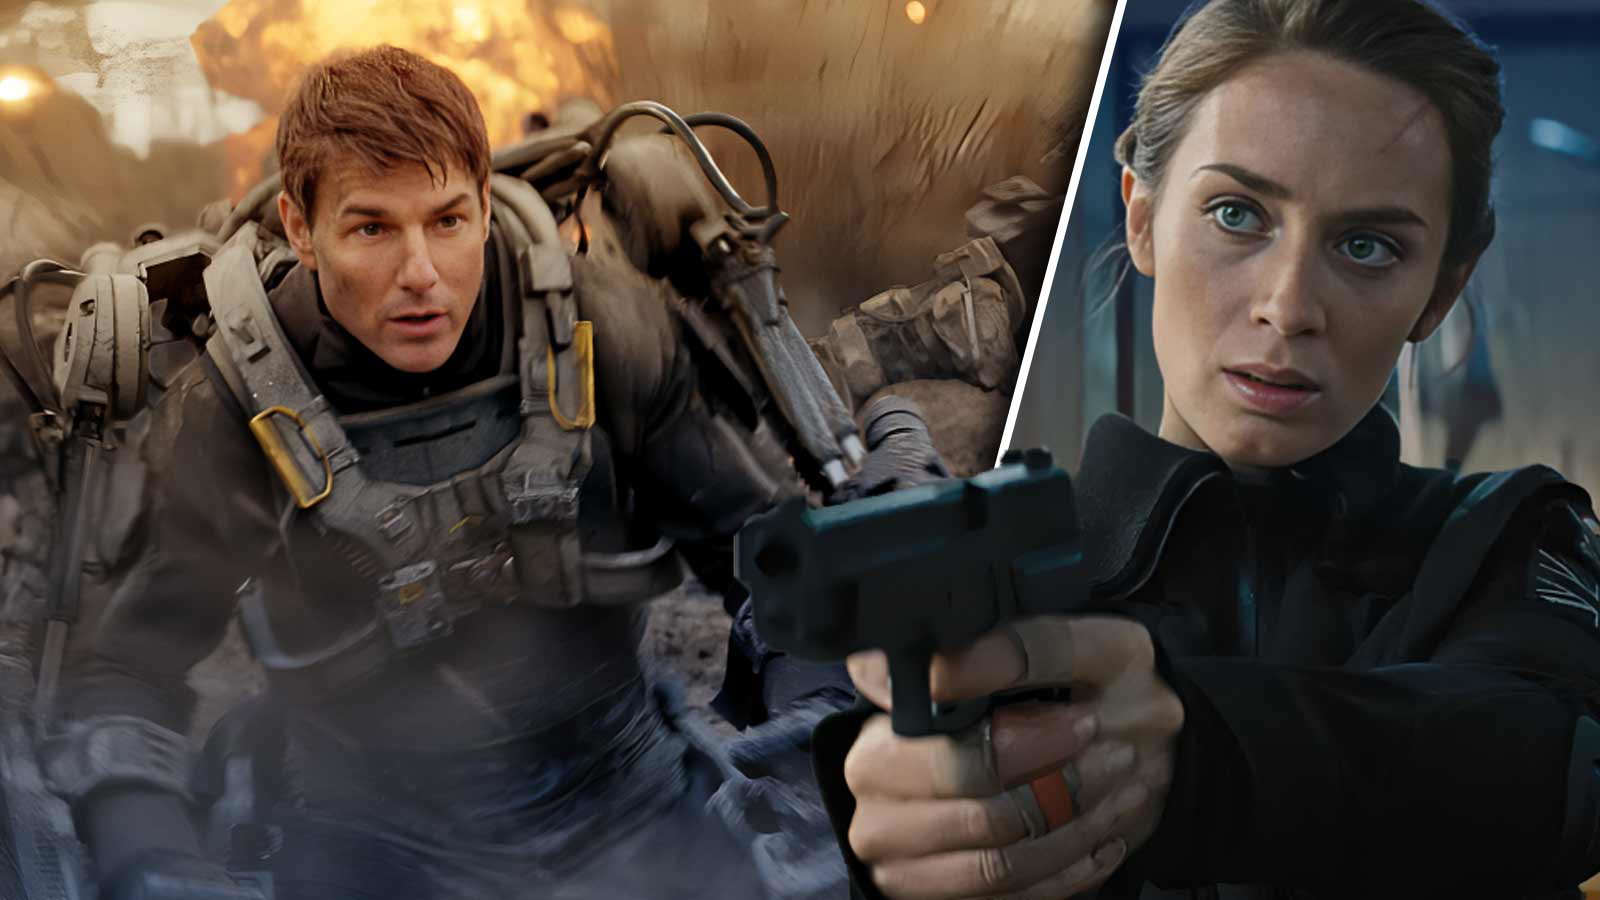 “One of the most underrated Tom Cruise movies”: Emily Blunt’s Wish Might Come True as Tom Cruise Shows Interest For Edge of Tomorrow 2